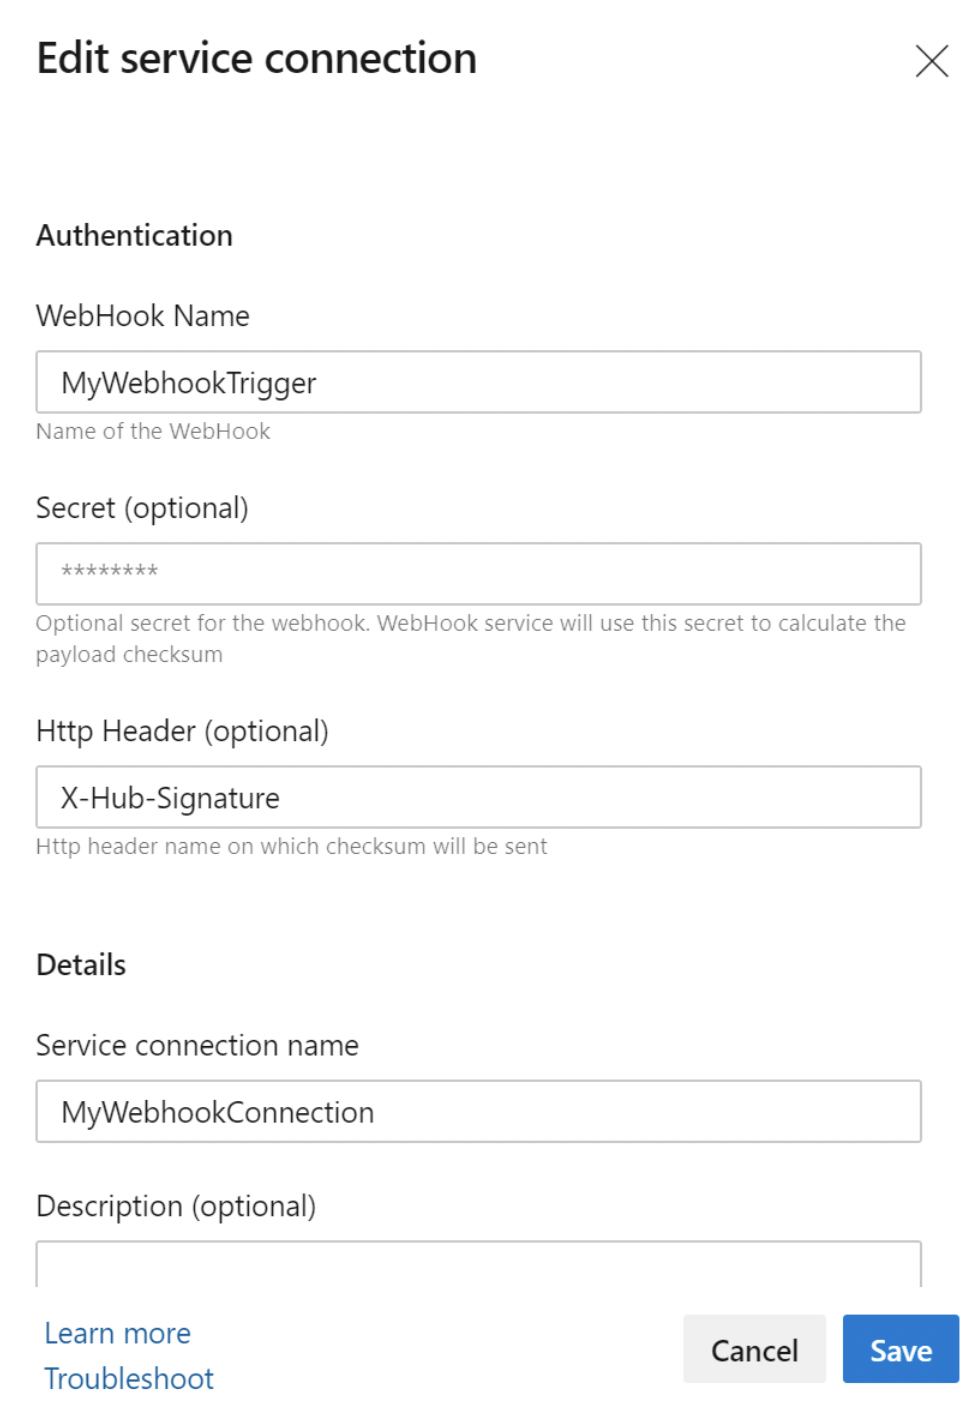 In the Edit service connection page, configure webhook triggers.